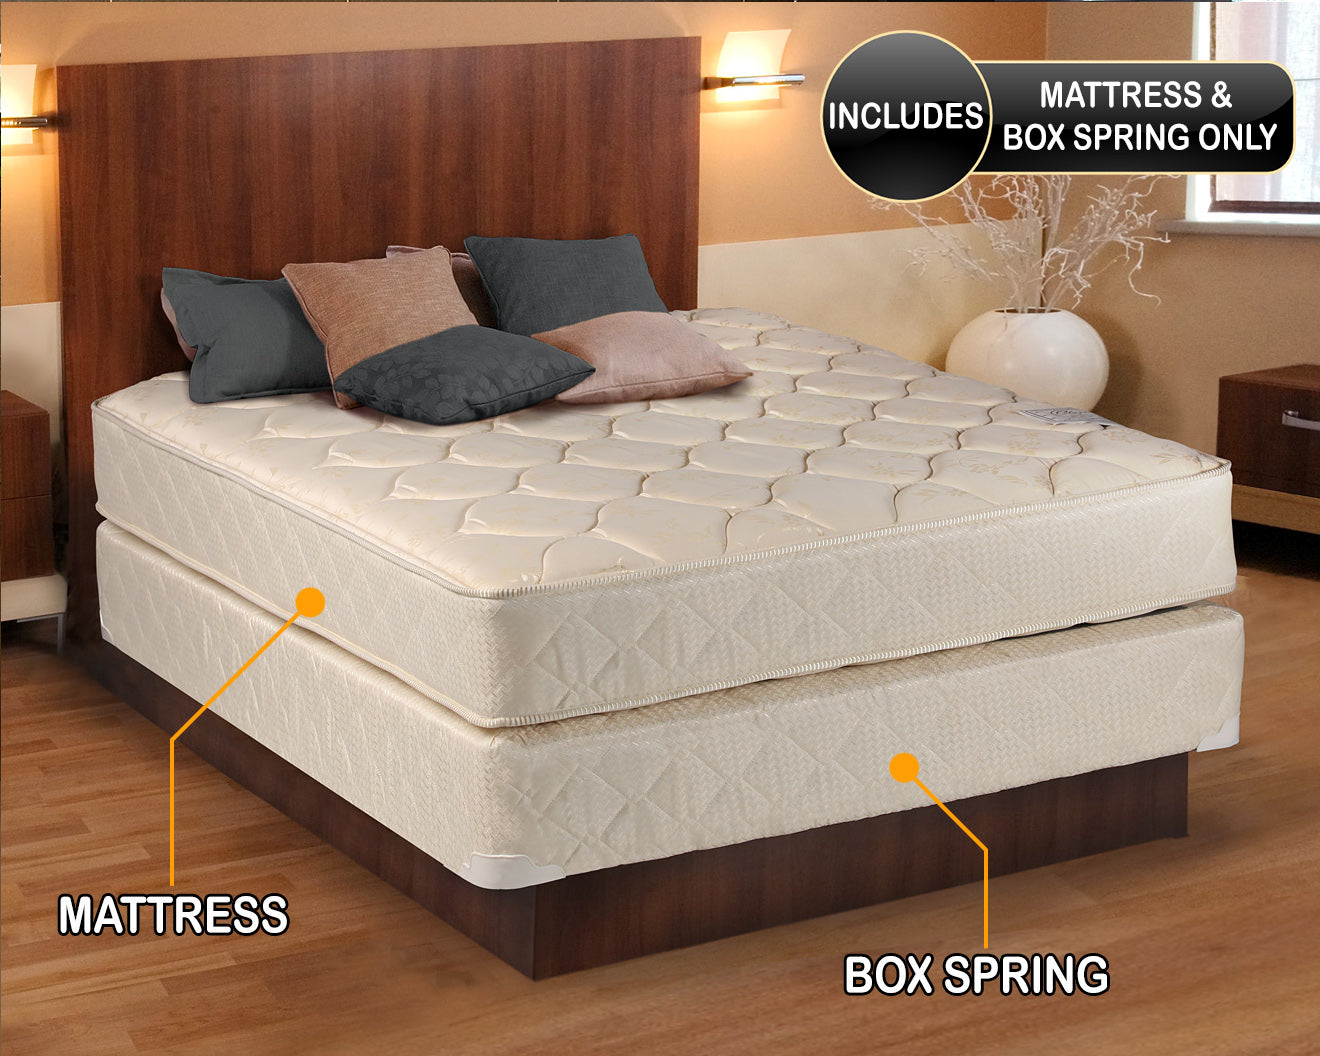 Comfort Classic Gentle Firm Full XL Mattress and Box Spring Set - Fully Assembled, Orthopedic, Good for Your Back, Long Lasting and 2 Sided